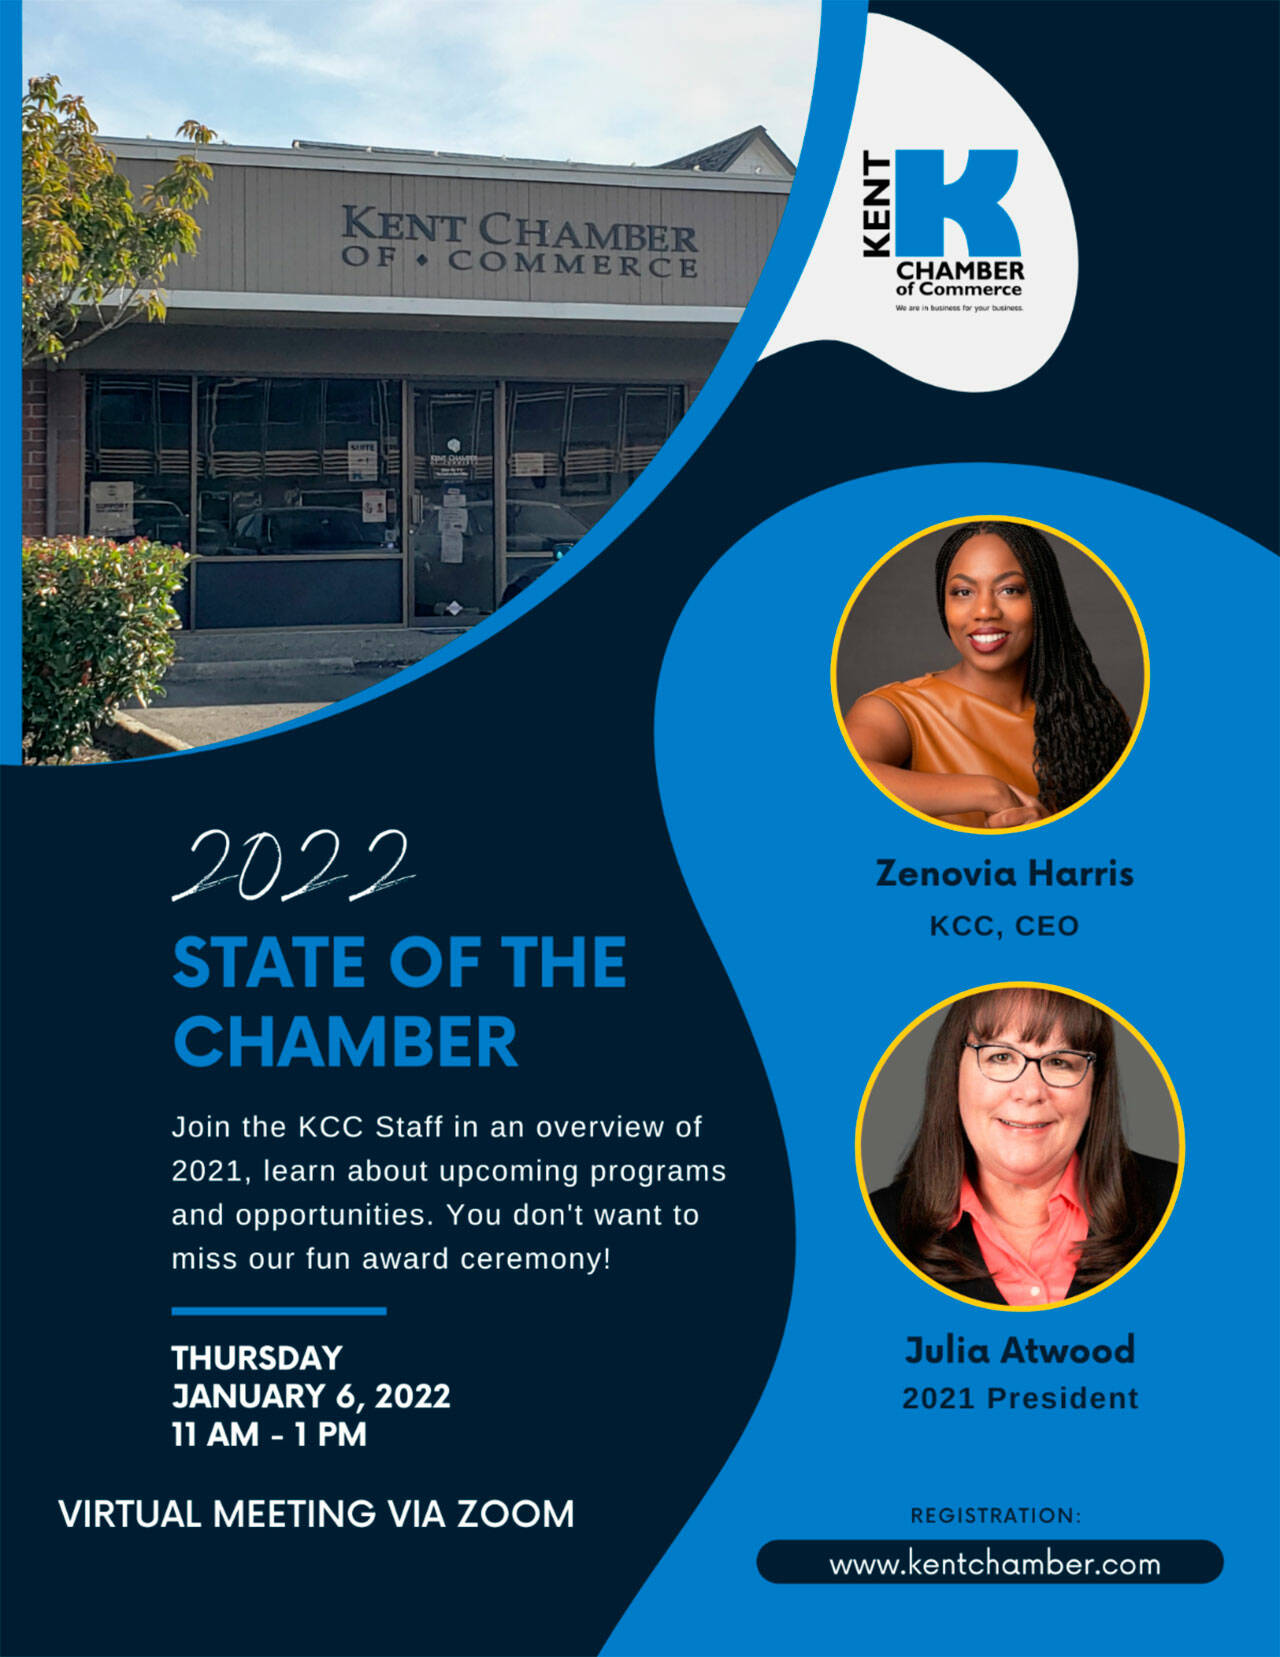 The Kent Chamber’s State of the Chamber on Jan. 6 will move to Zoom due to COVID-19. COURTESY IMAGE, Kent Chamber of Commerce